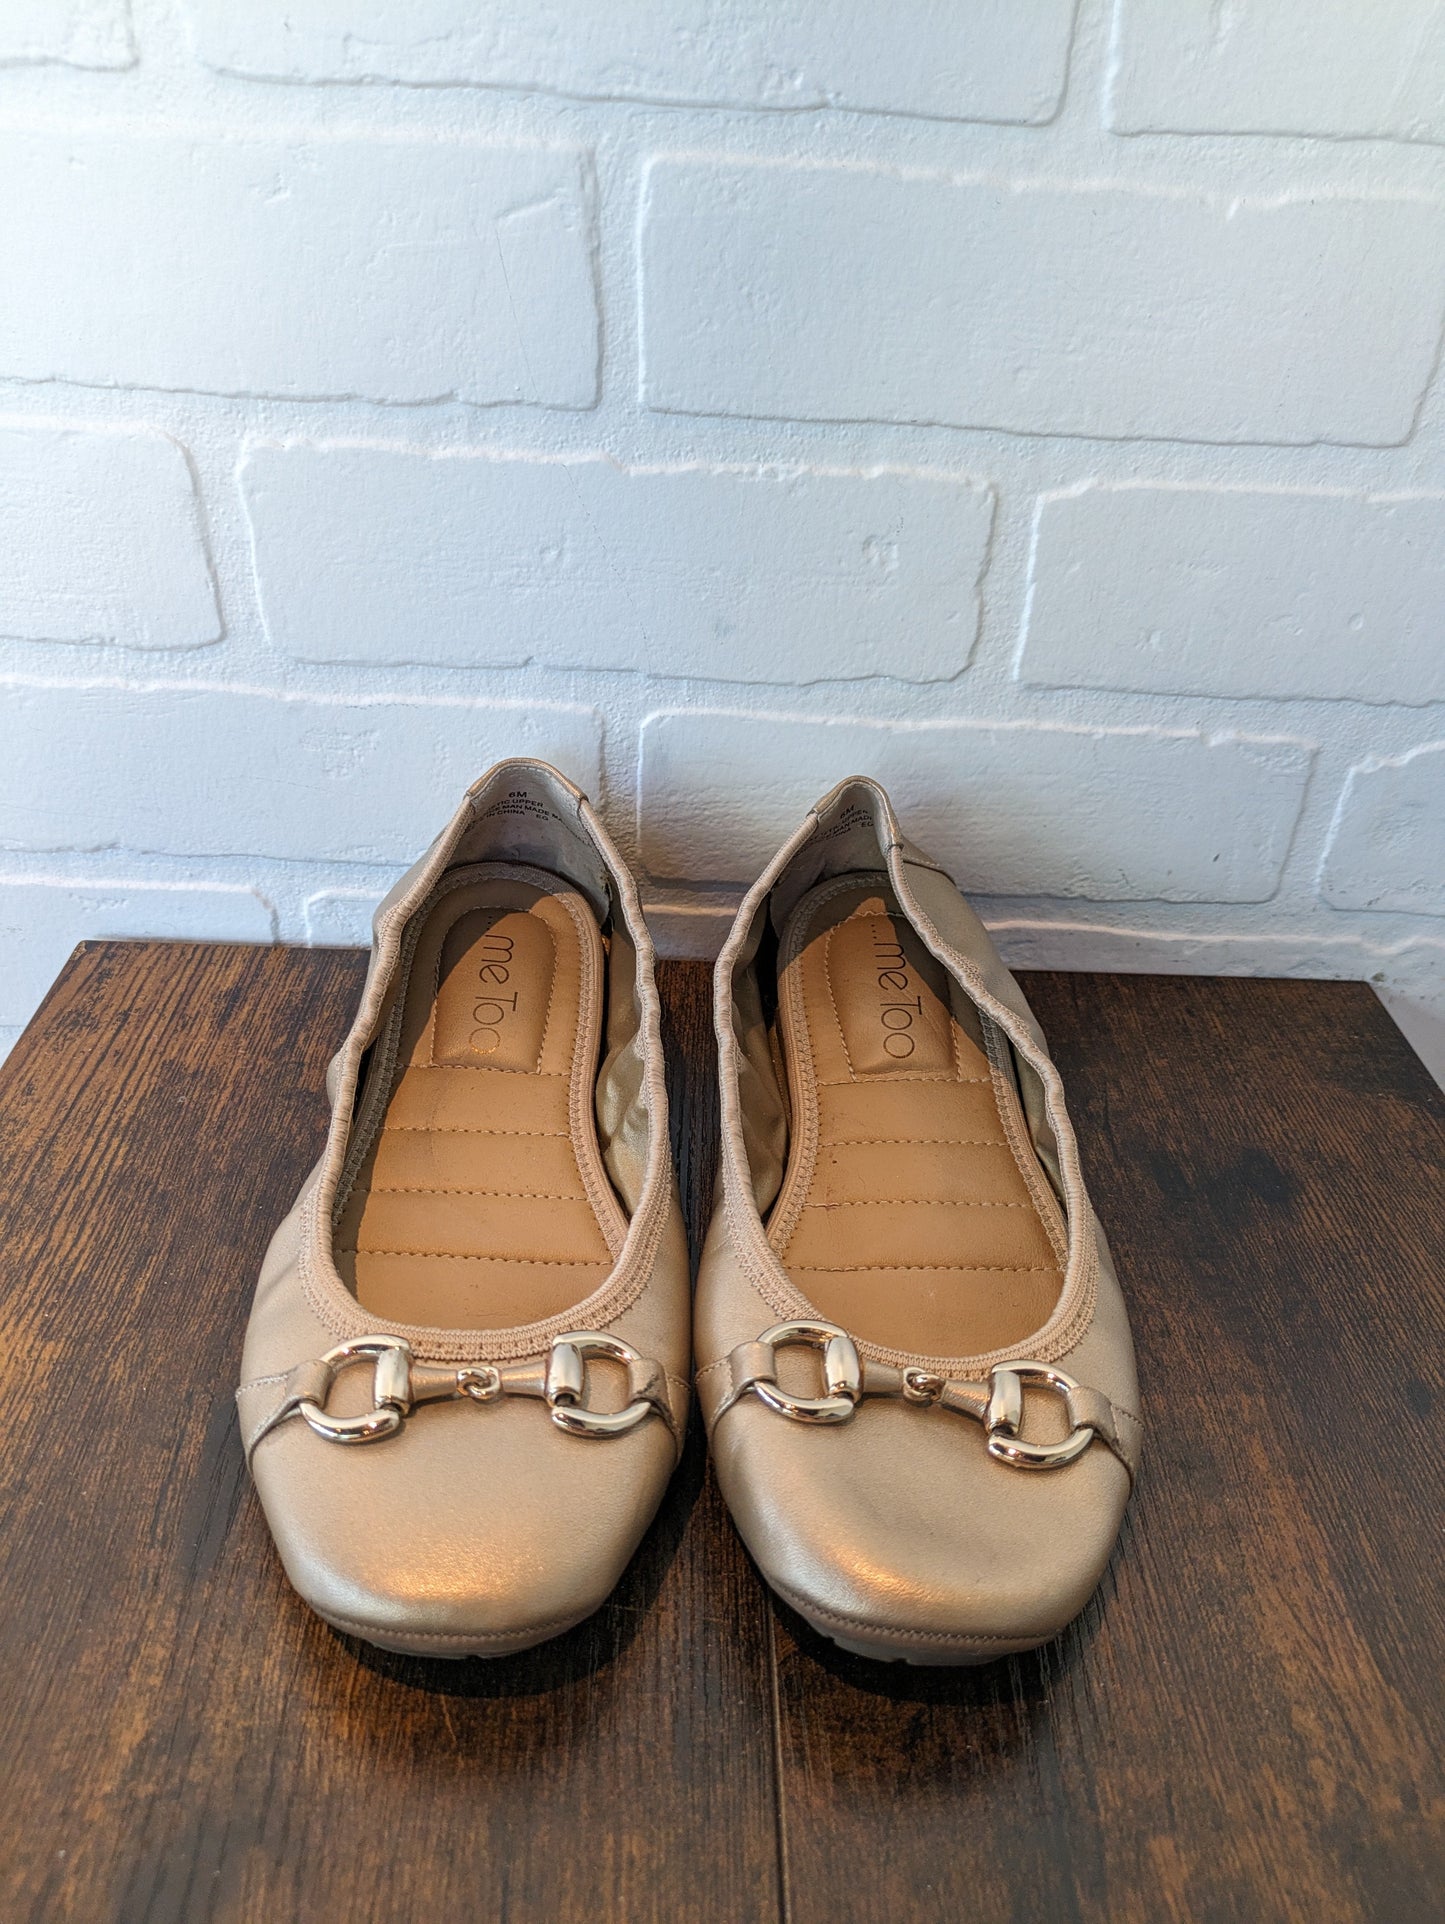 Gold Shoes Flats Me Too, Size 6